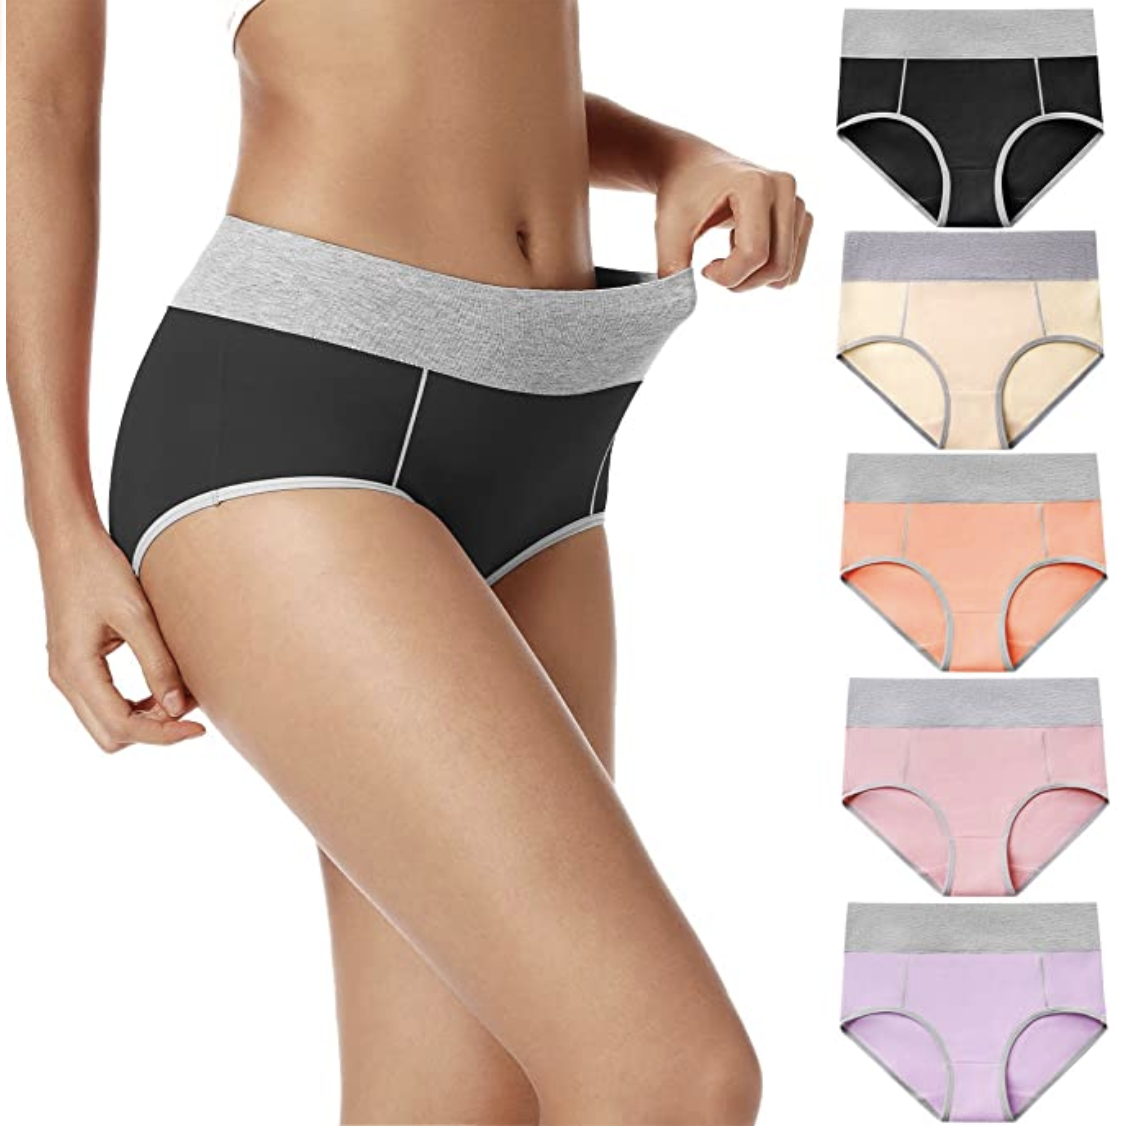 Model in black and gray high waisted underwear next to pic of the undies in yellow, orange, pink, and purple 